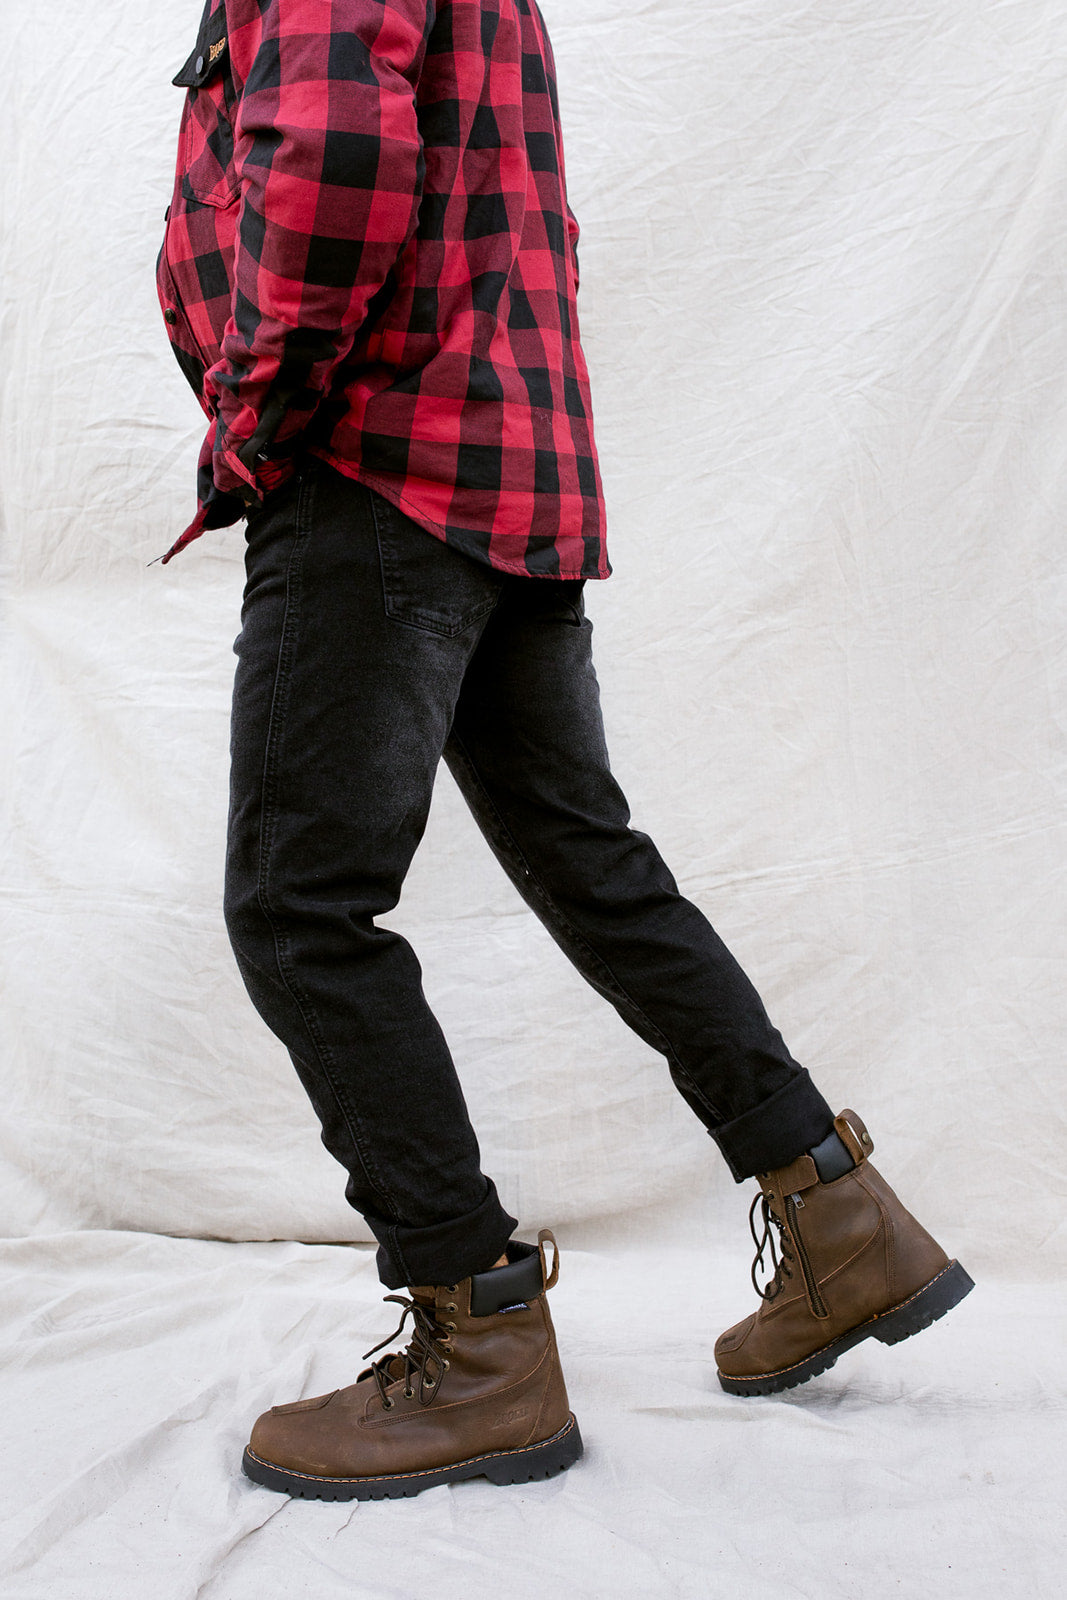 California Washed Black Jeans - Slim Fit